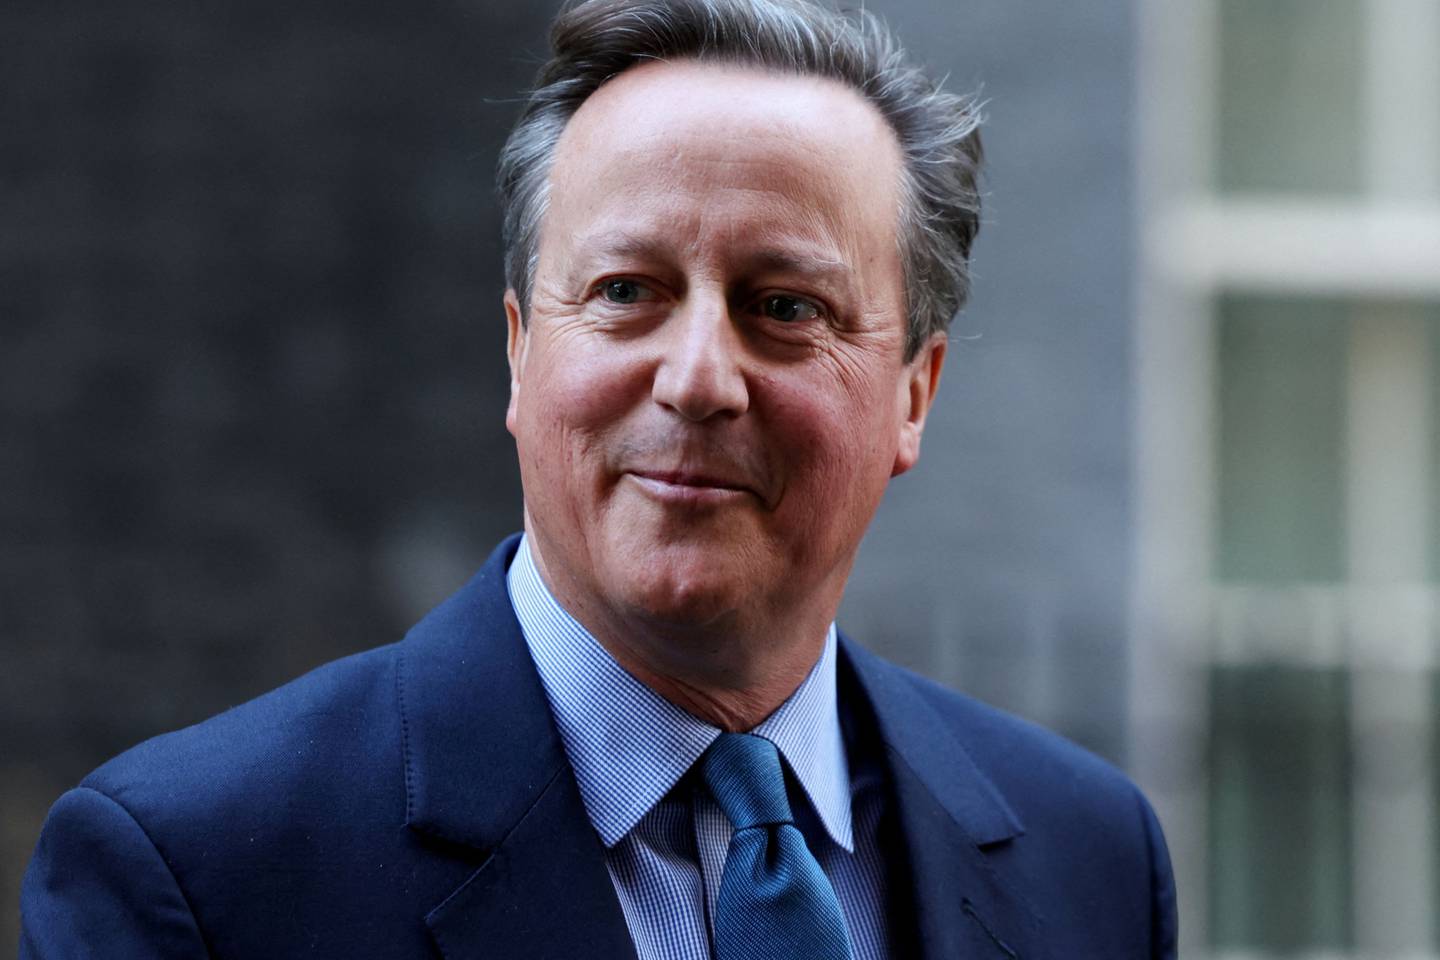 How and why has David Cameron returned to frontline UK politics?